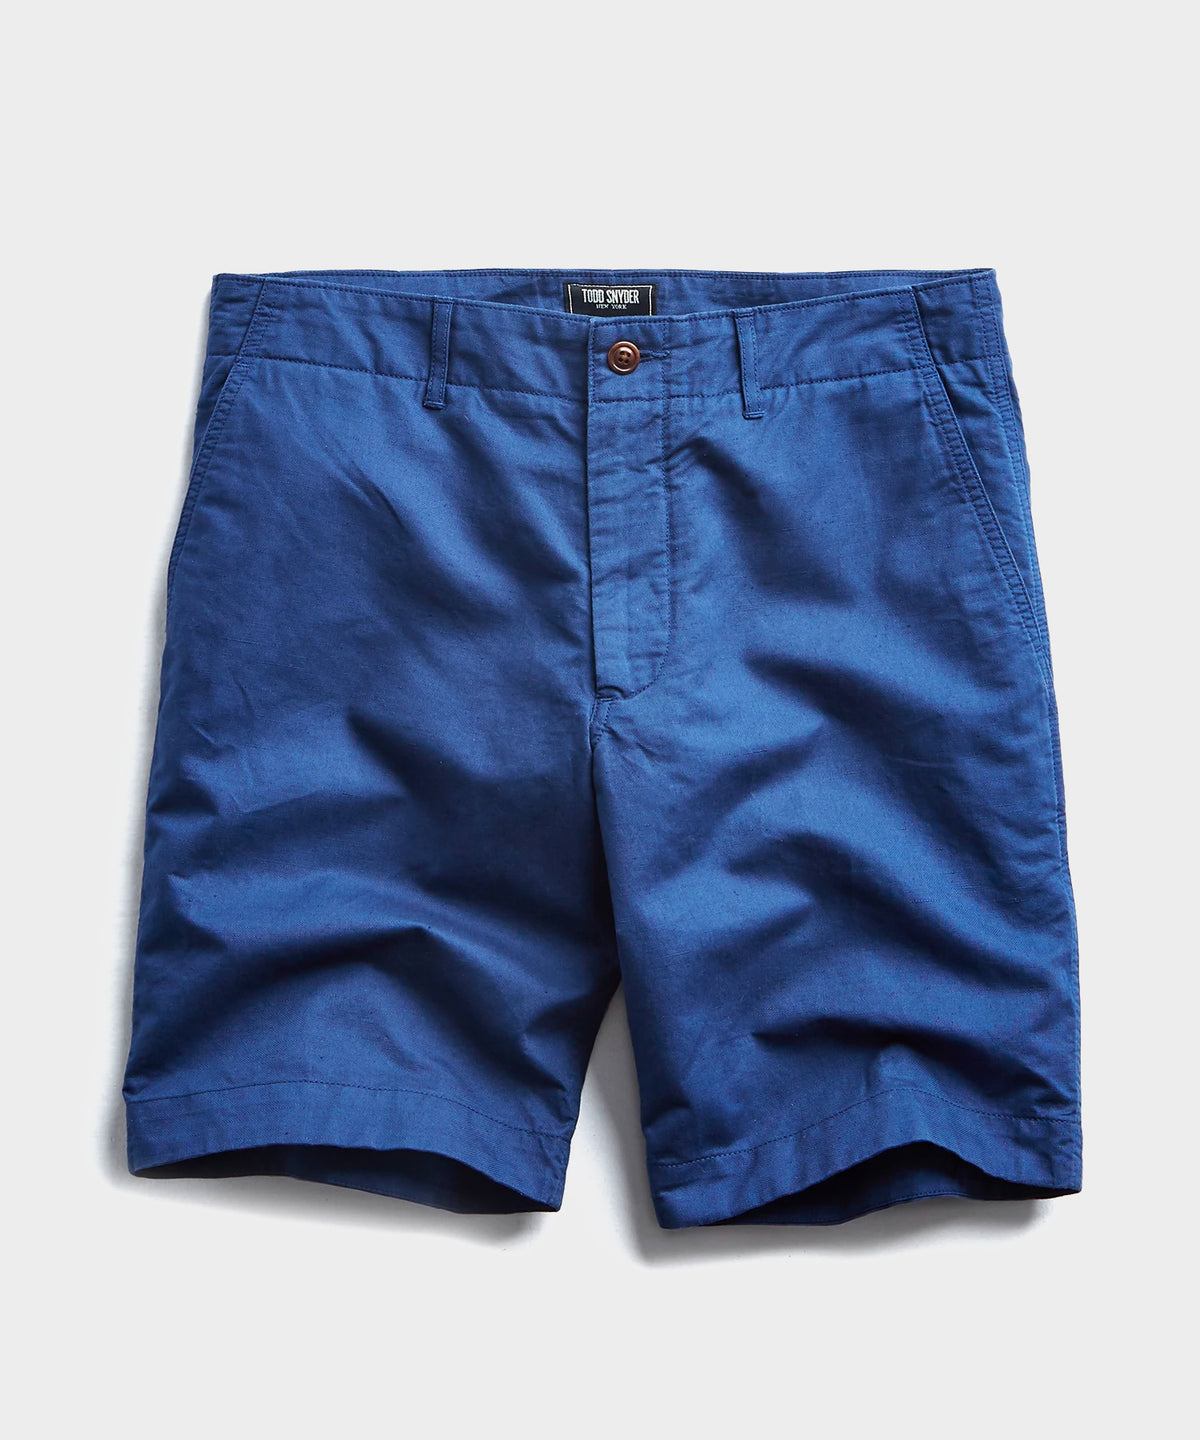 Shorts on Sale - Todd Snyder